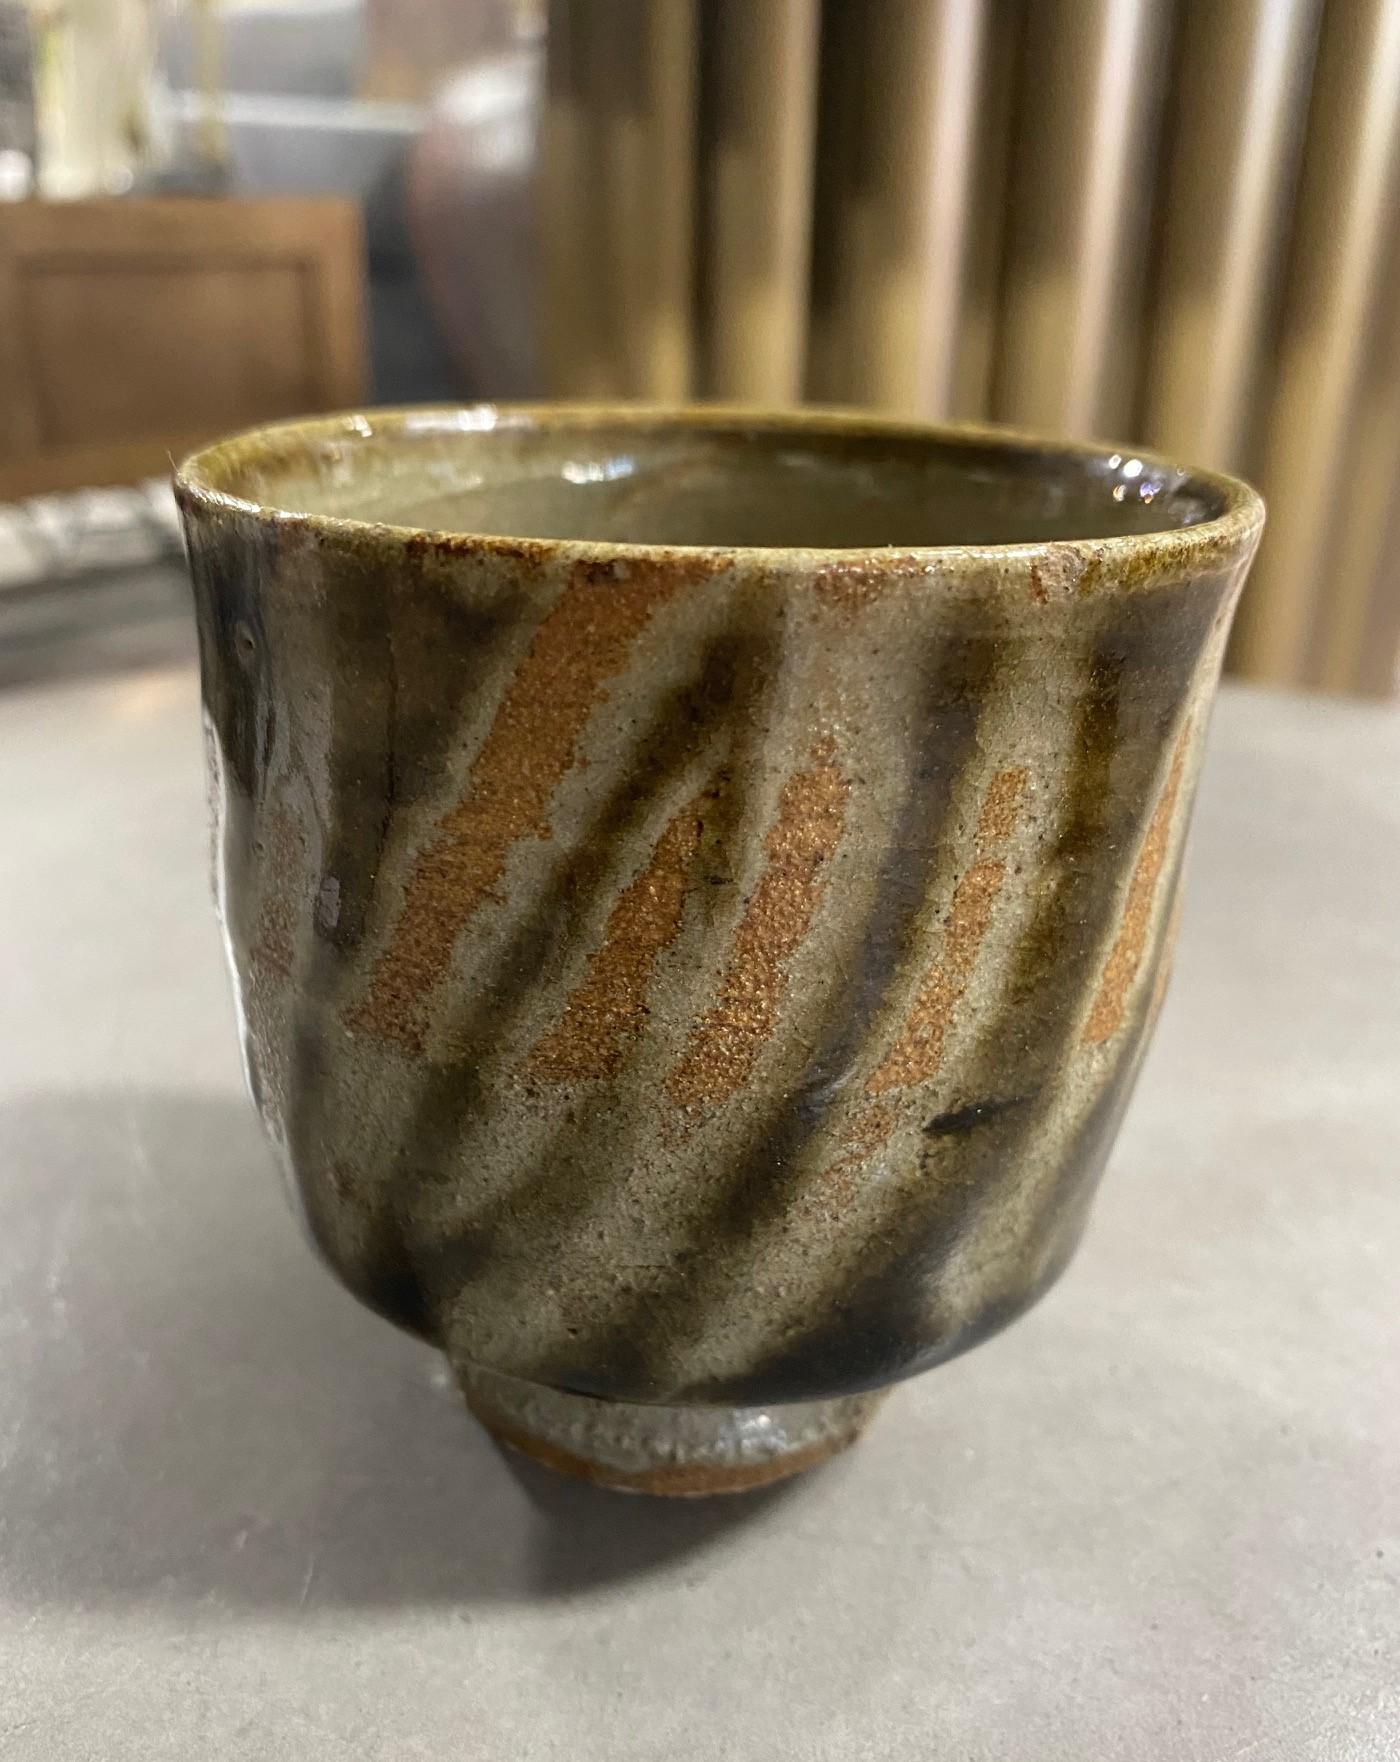 An exquisite, beautifully glazed yunomi tea cup by master Japanese potter Shoji Hamada featuring Hamada's famous diagonal finger wipe technique and a glossy dark celadon Oribe rice ash glaze which is accentuated by the underlying iron-laden clay